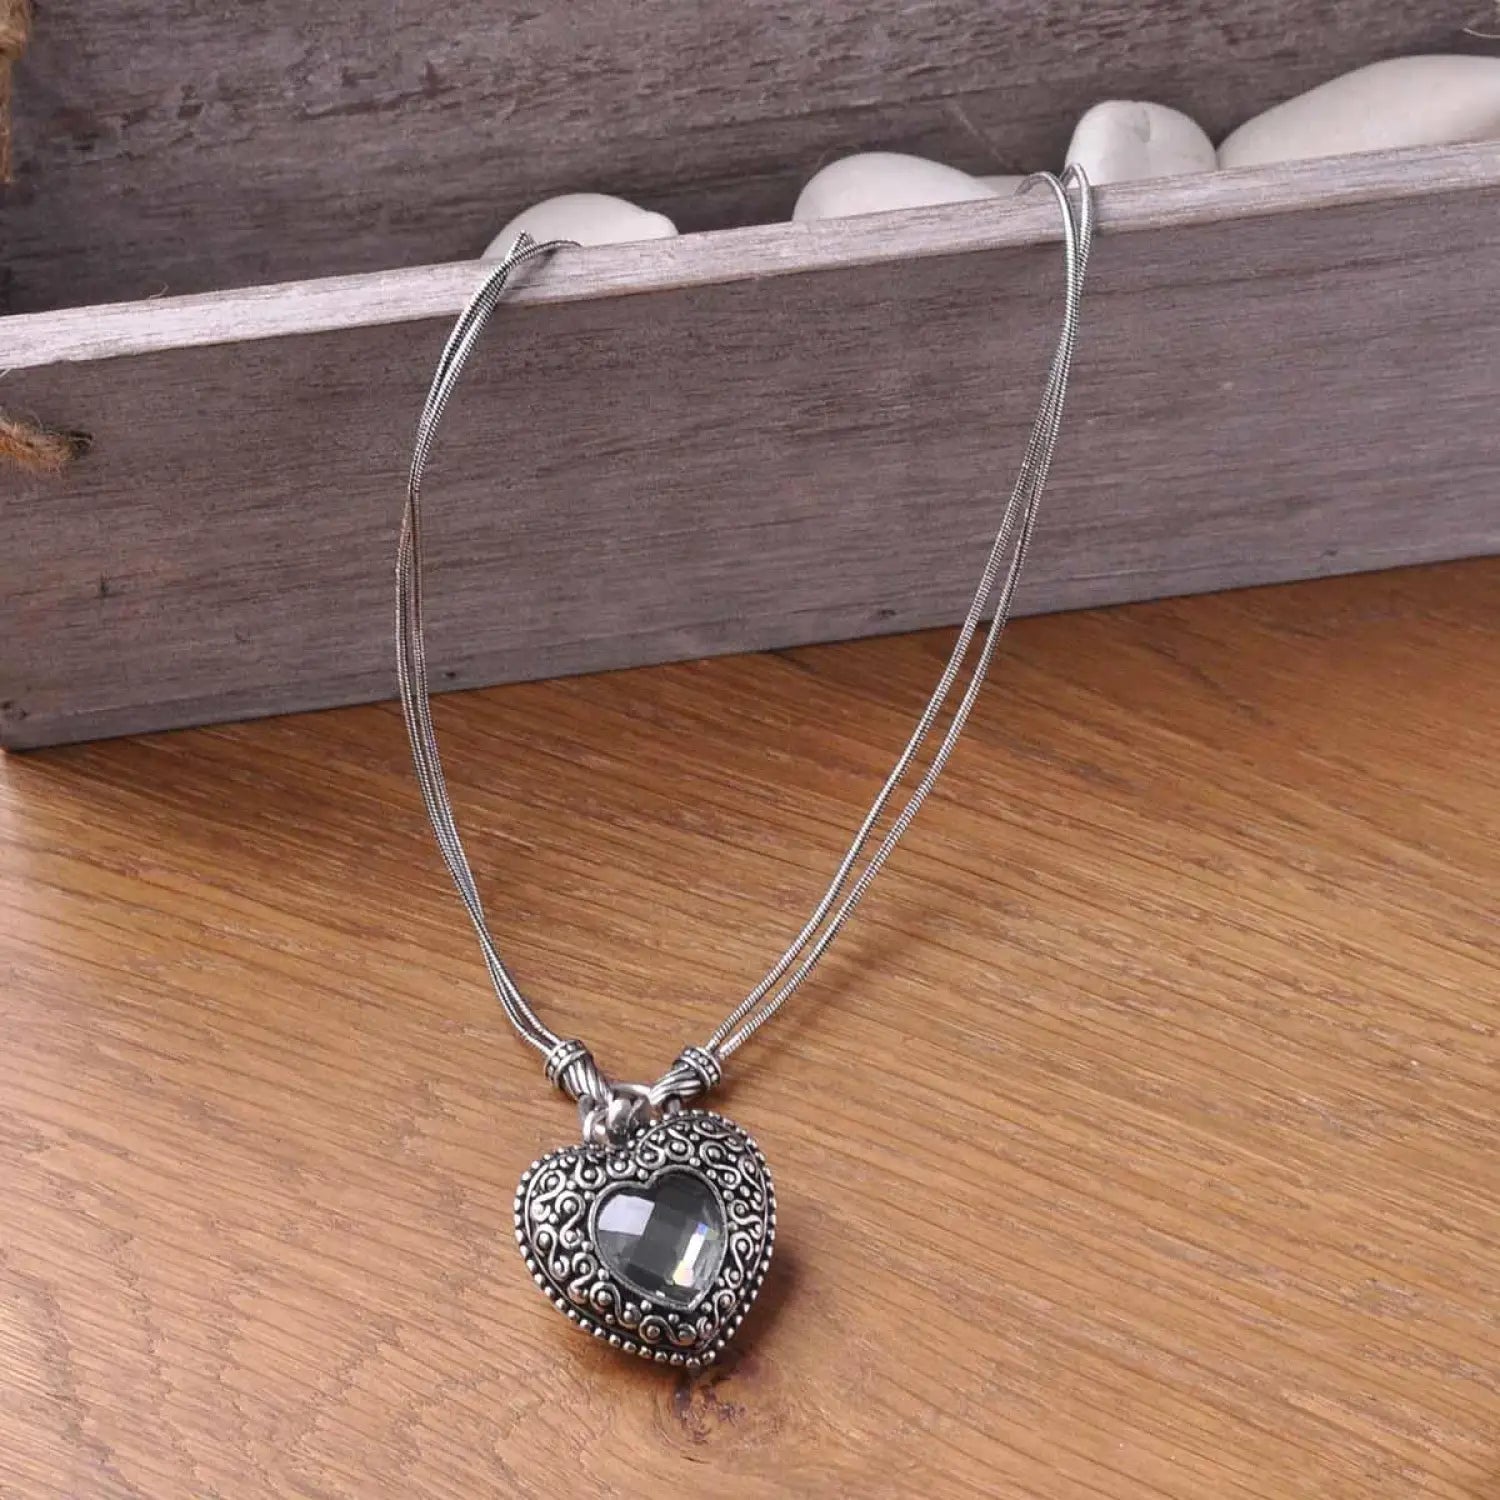 Antique silver necklace with black stone pendant, Gemstone Heart Antique Silver Filigree Pendant Statement Necklace